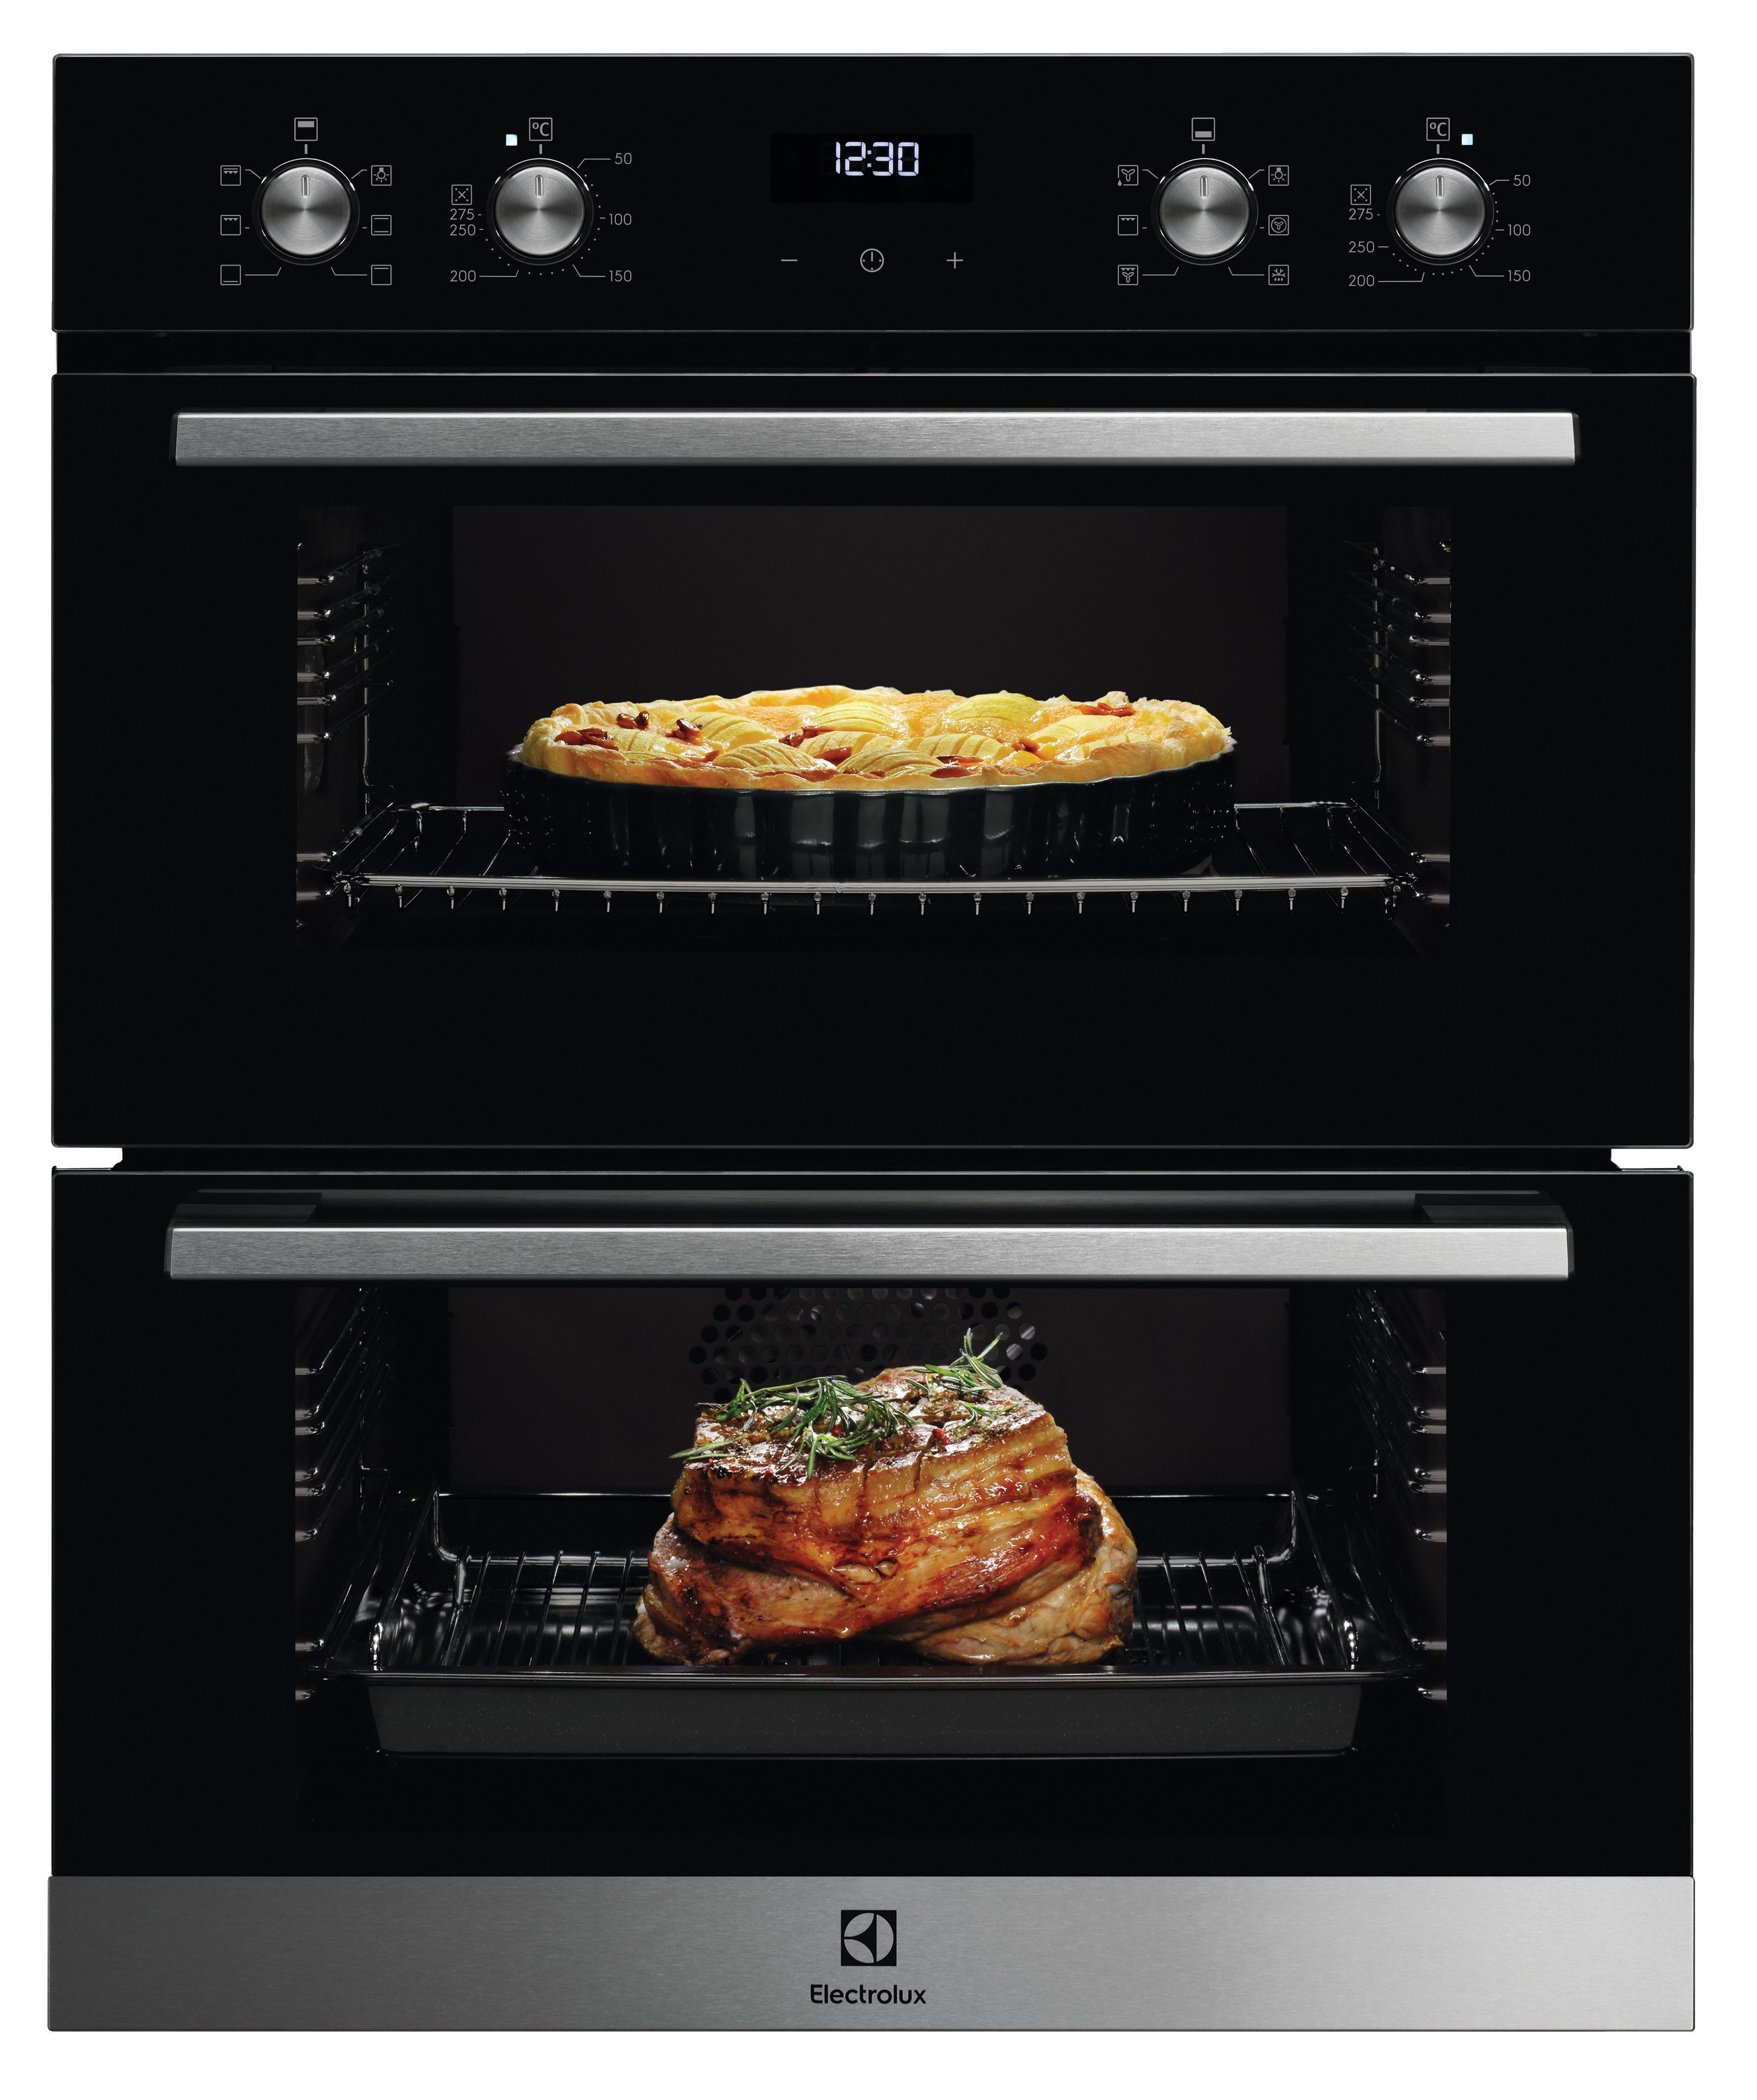 Electrolux EDFDC46UX Built-Under Double Oven - Black